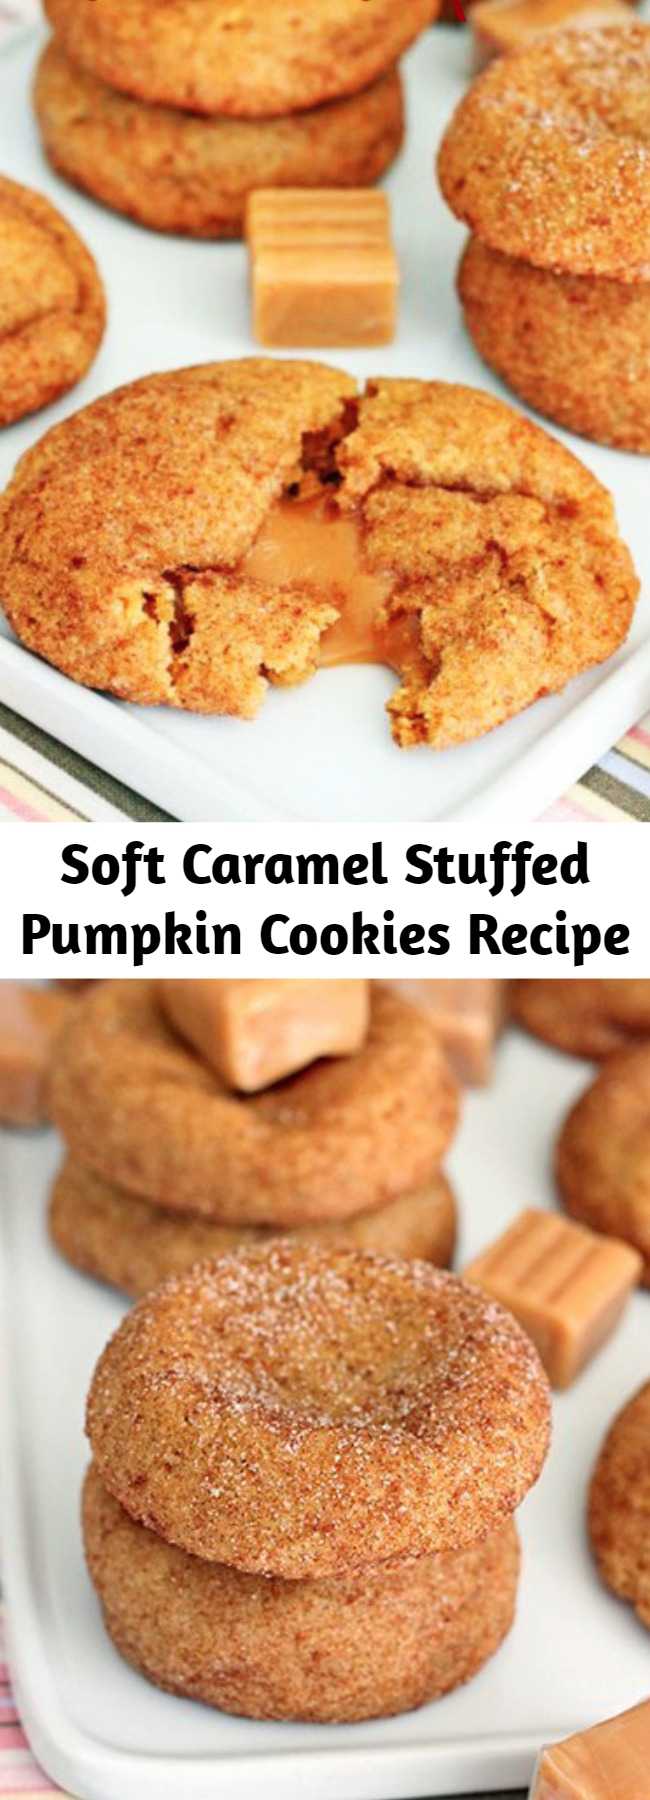 Soft Caramel Stuffed Pumpkin Cookies Recipe - Soft cinnamon-spiked pumpkin cookies with surprise caramel centers. They have a subtle pumpkin flavor highlighted by cinnamon both inside and out.